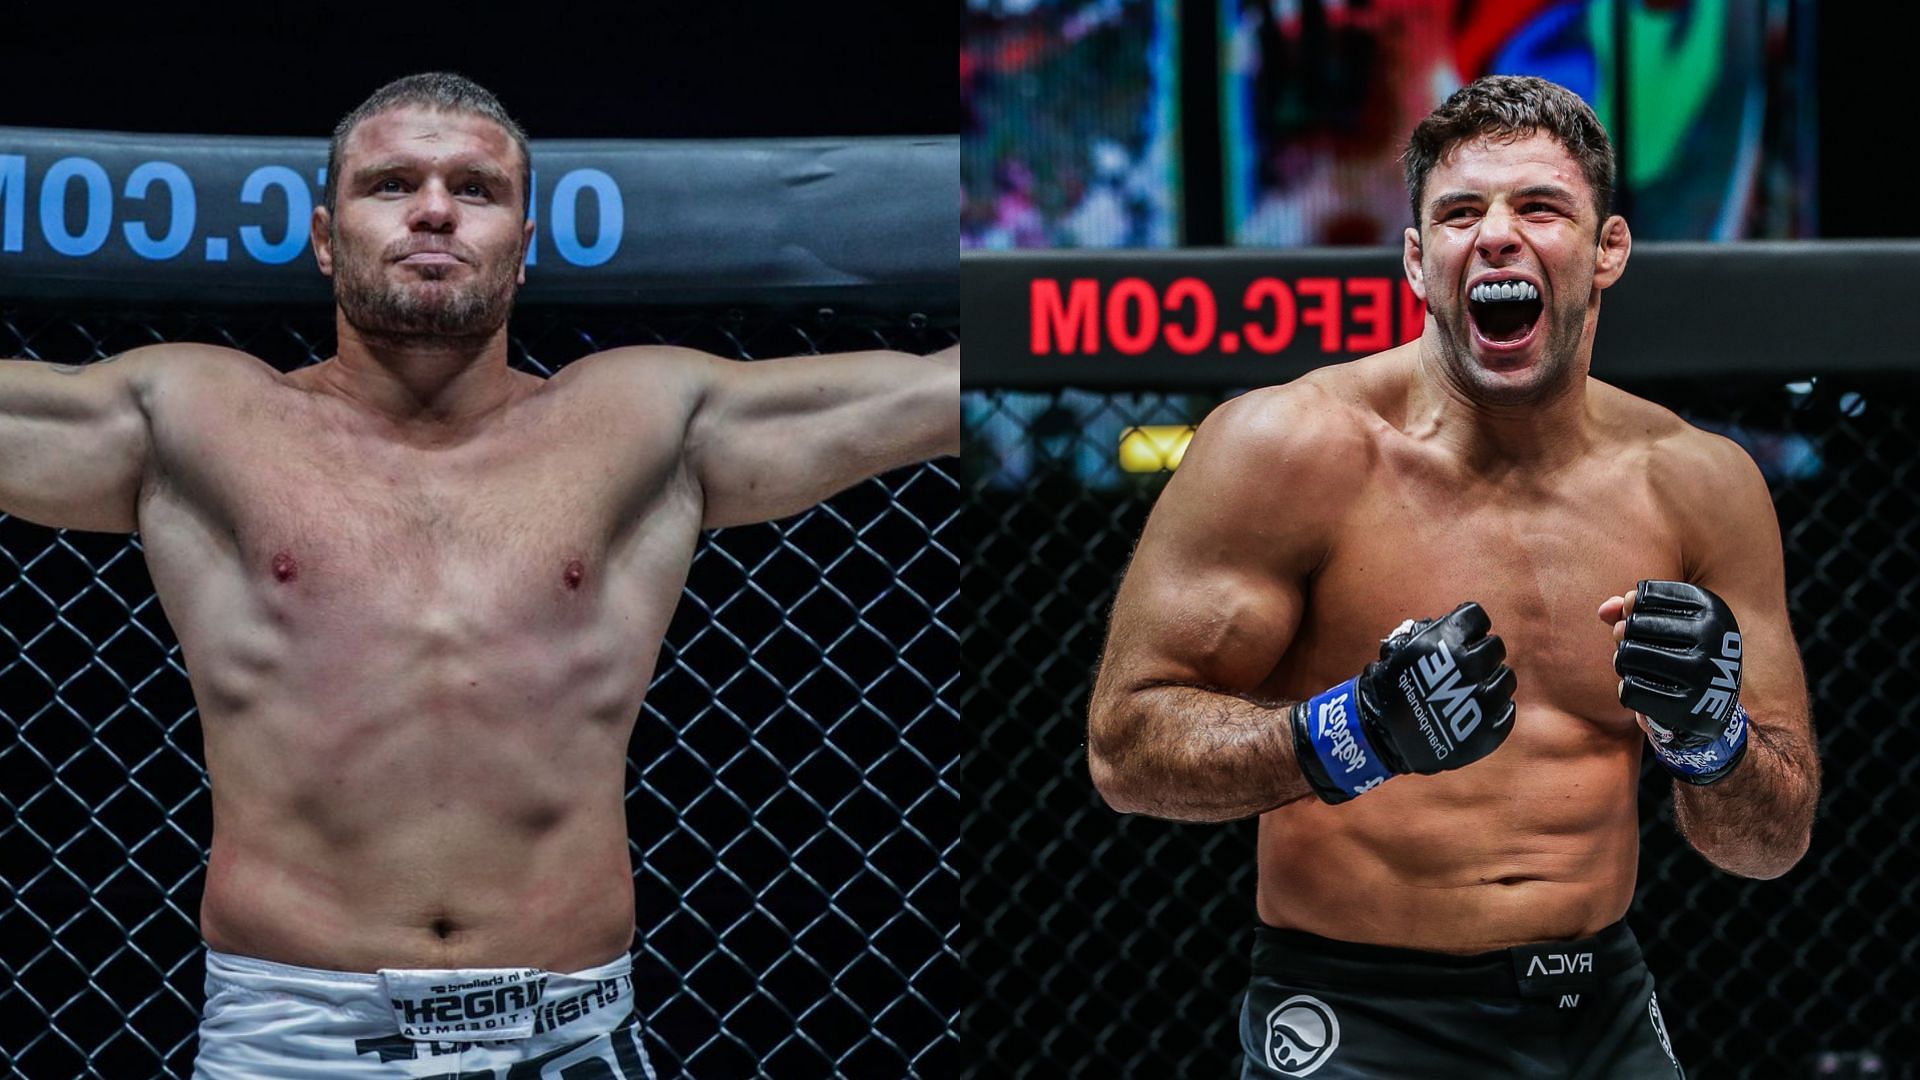 Malykhin challenges Buchecha to grappling match